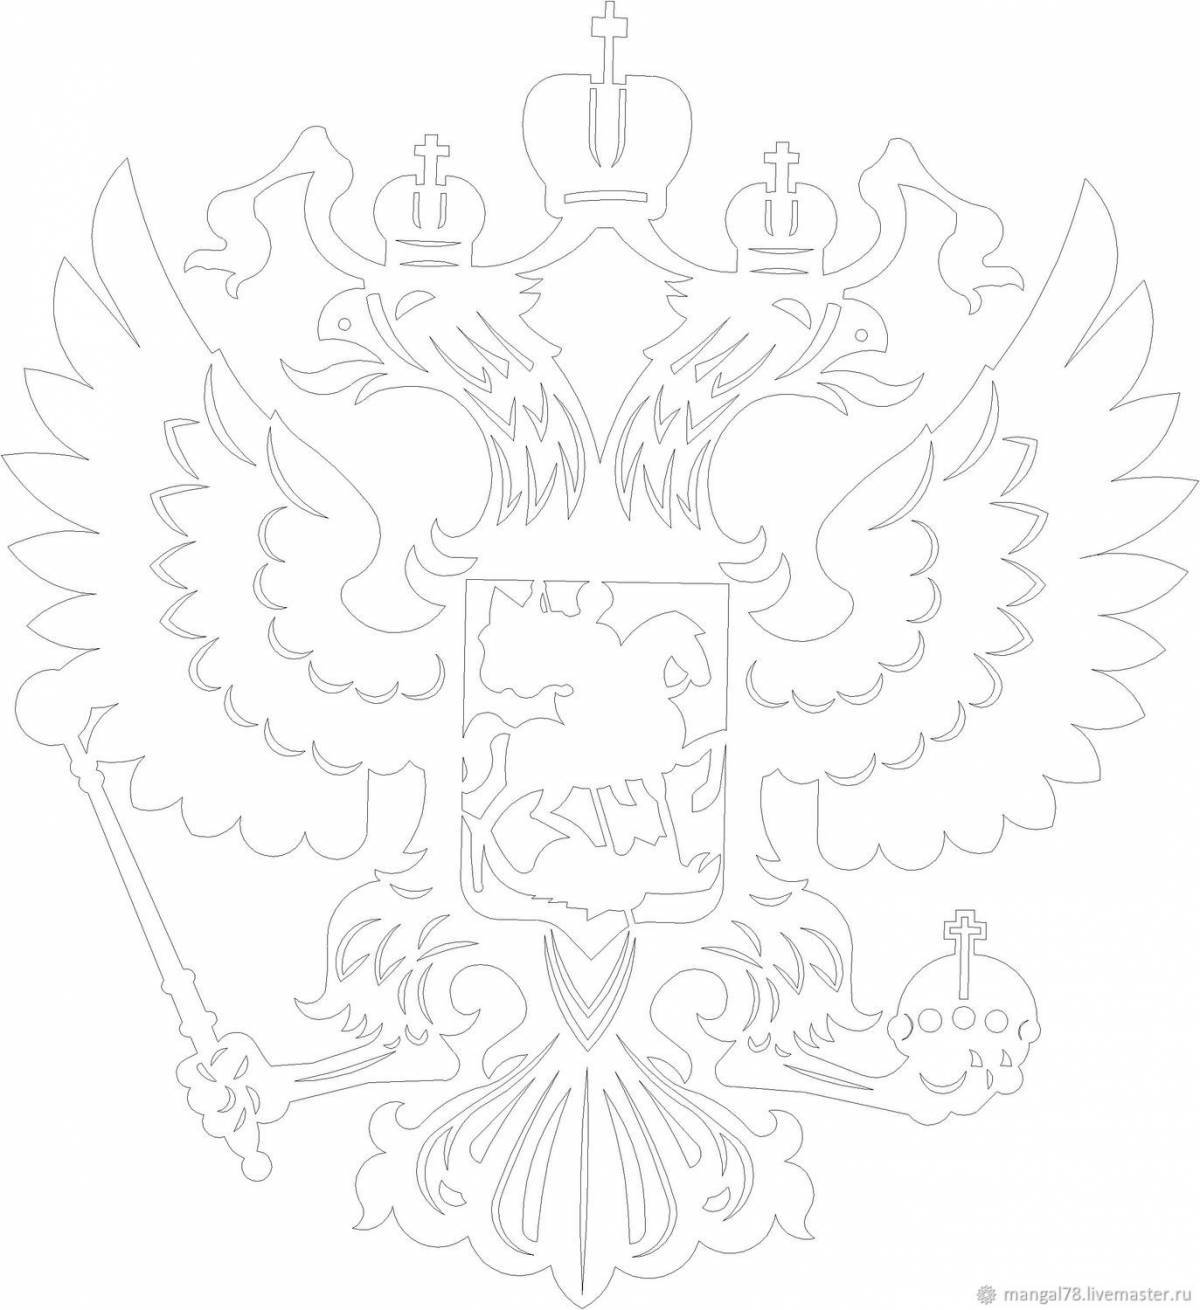 Attractive coat of arms of russia for kids